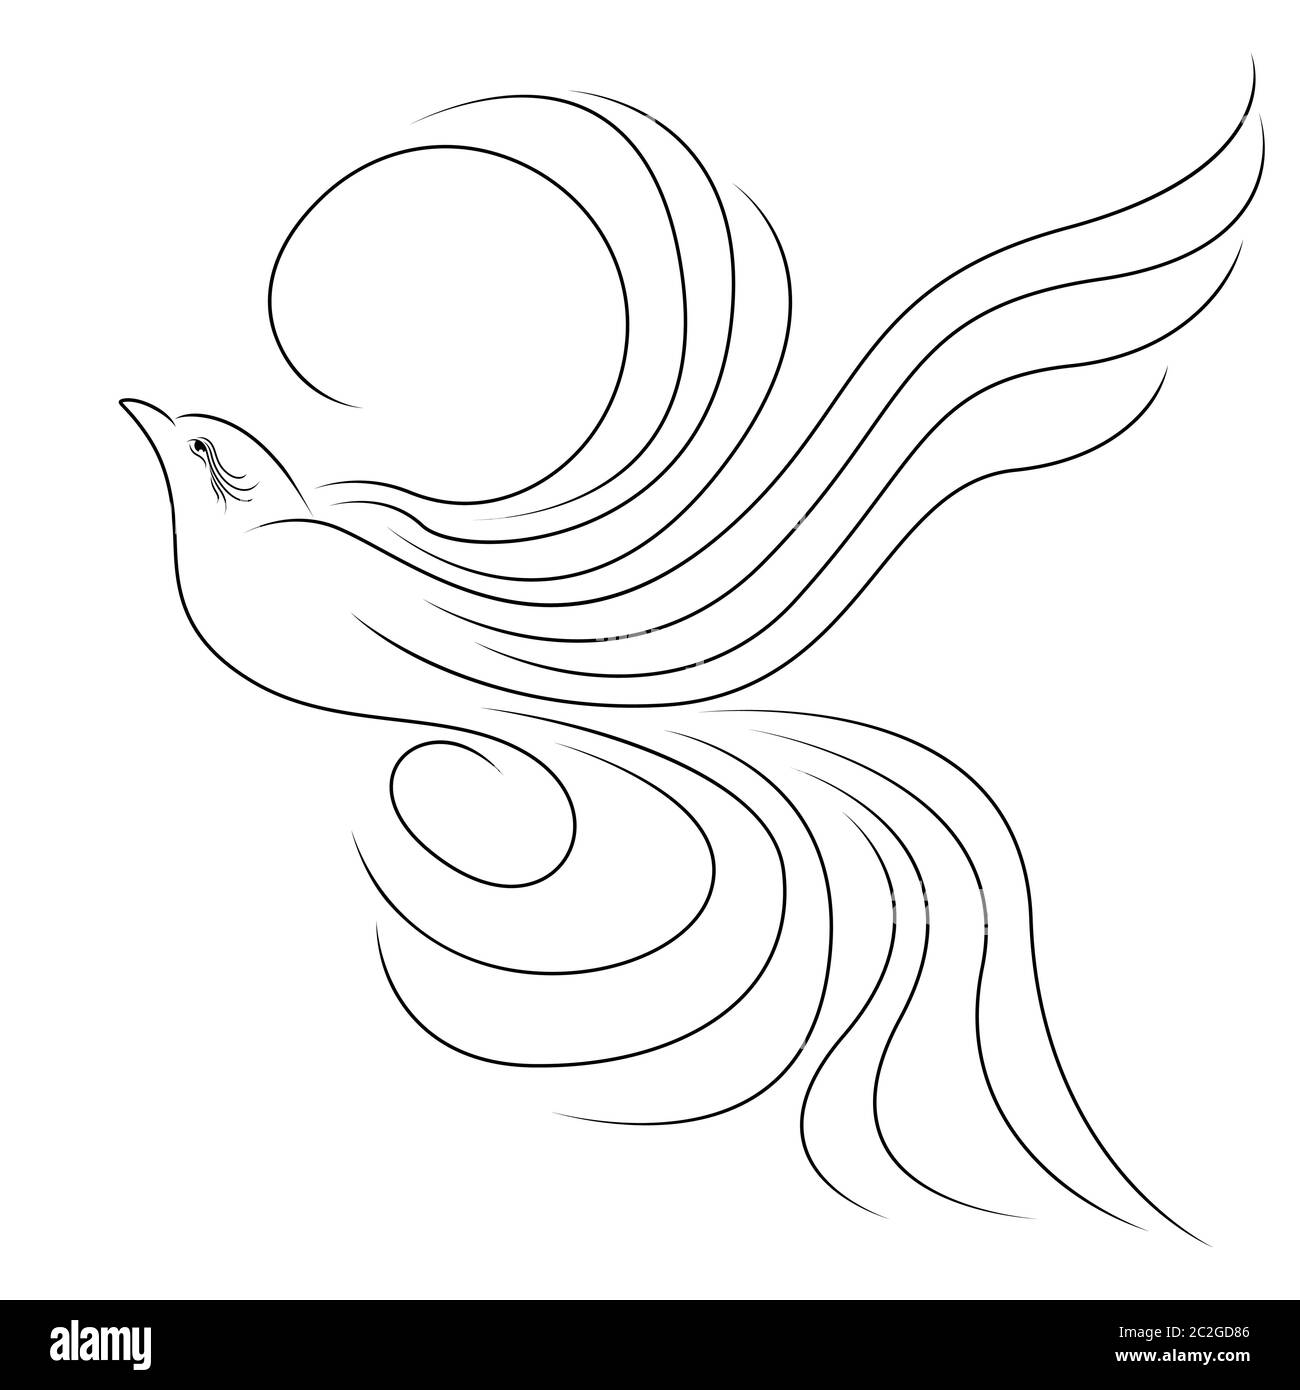 Black outline of beautiful flying bird illustration isolated on the white background Stock Vector